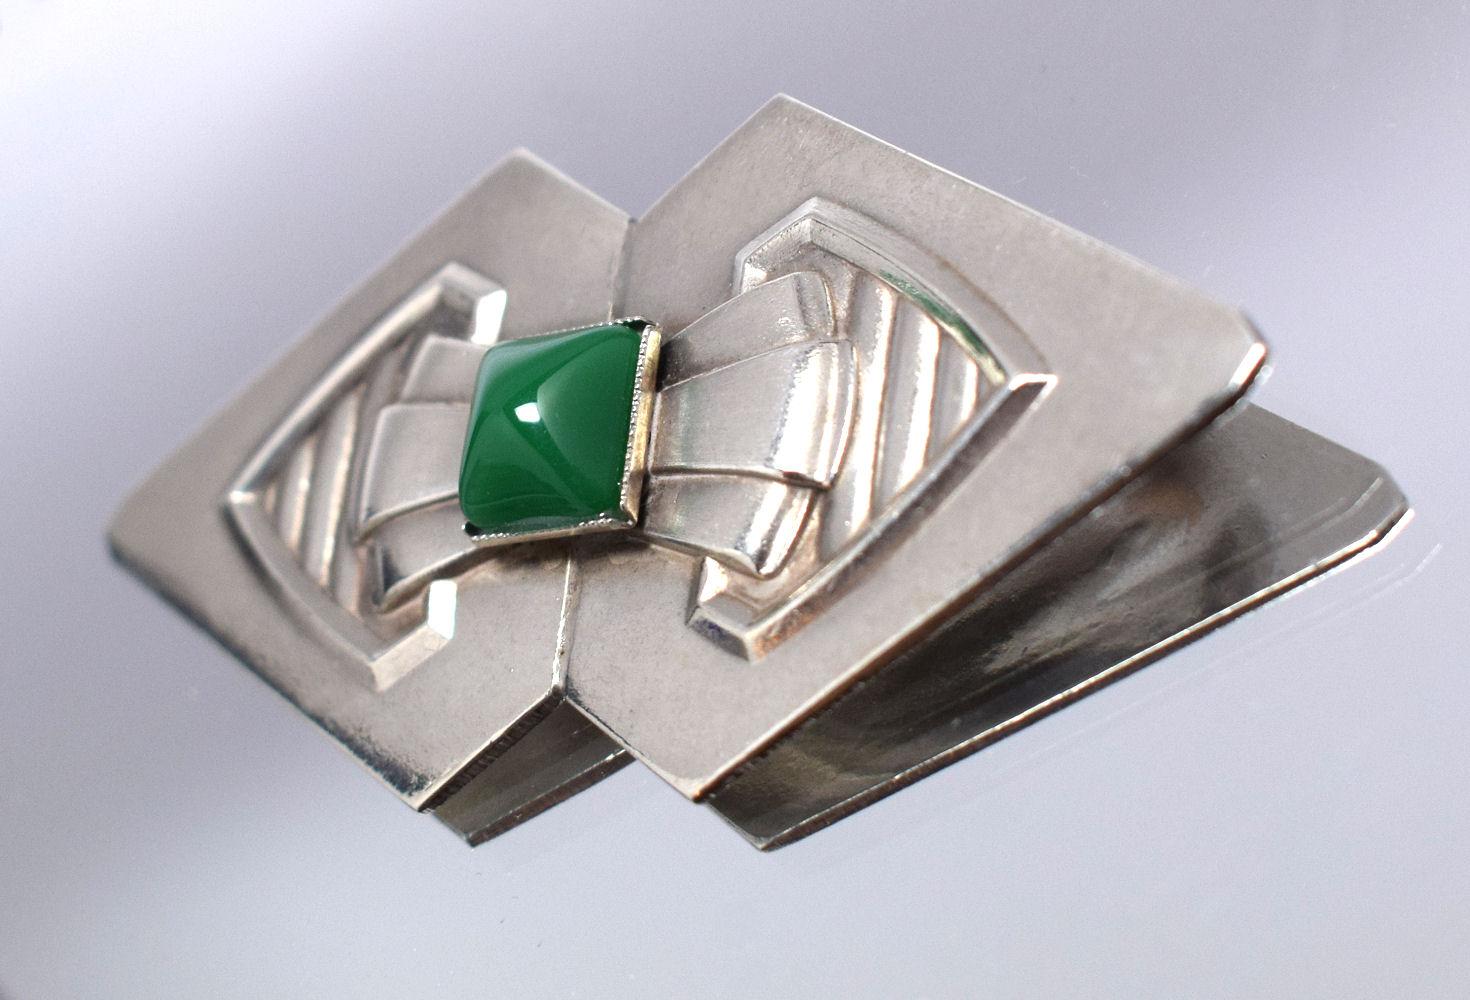 For your consideration is this very stylish Modernist Brooch by Jakob Bengel. Dating to the 1930's this is a very innovative and individual piece of jewellery, aesthetically characterised by the lightness in the design. Silvered Metal with green